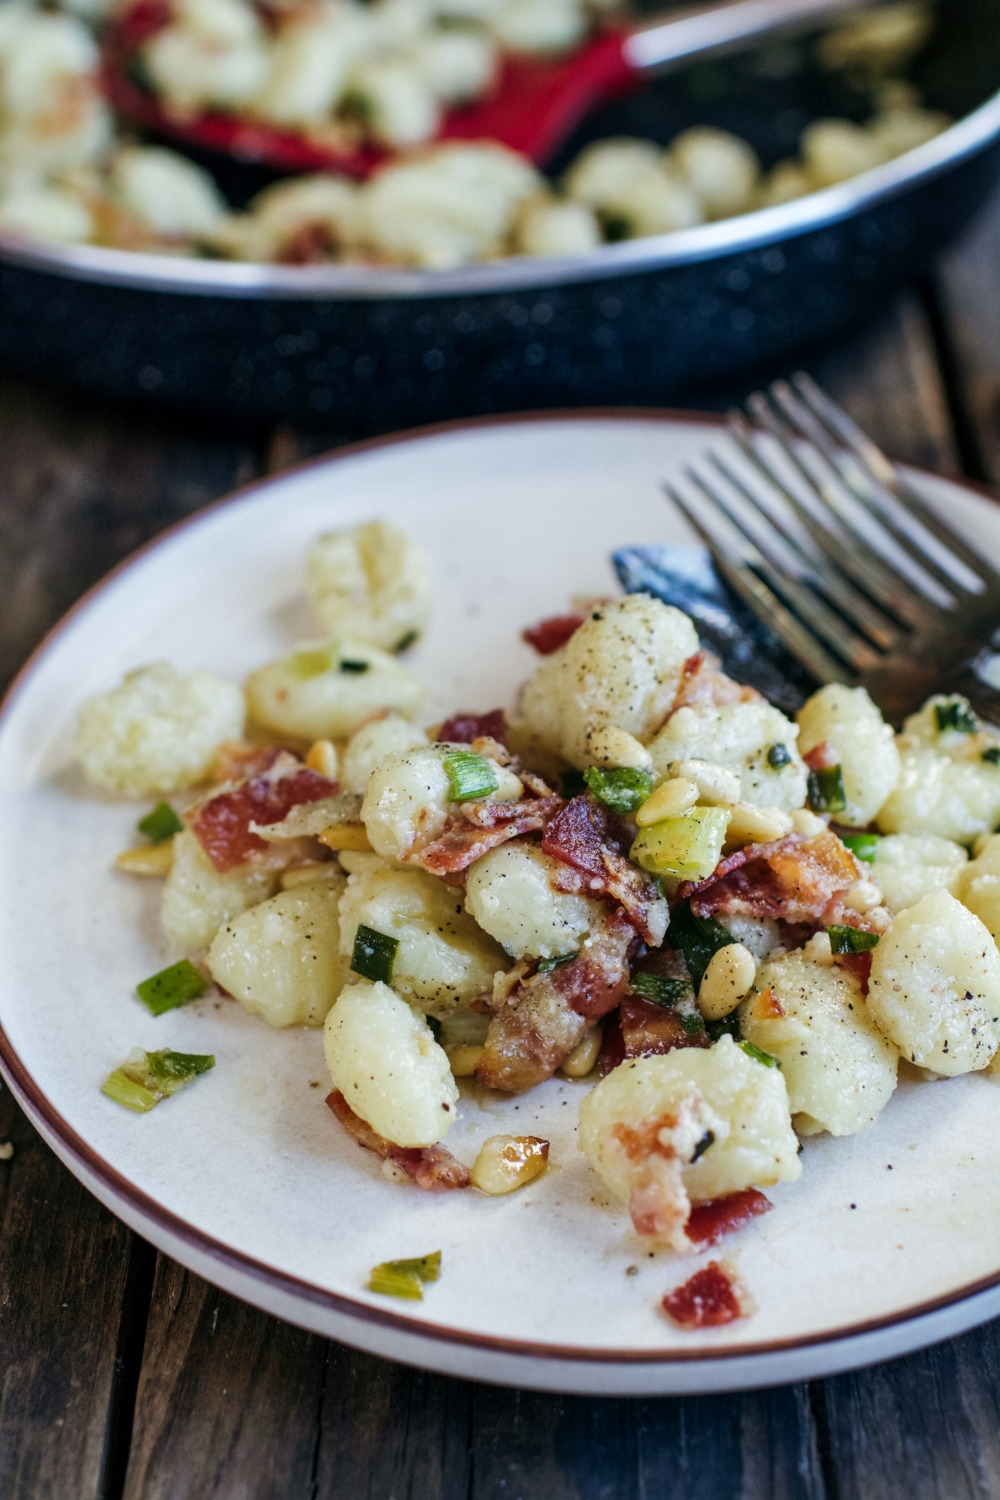 Gnocchi with Crispy Bacon, Scallions, Toasted Pine Nuts and Parmigiano